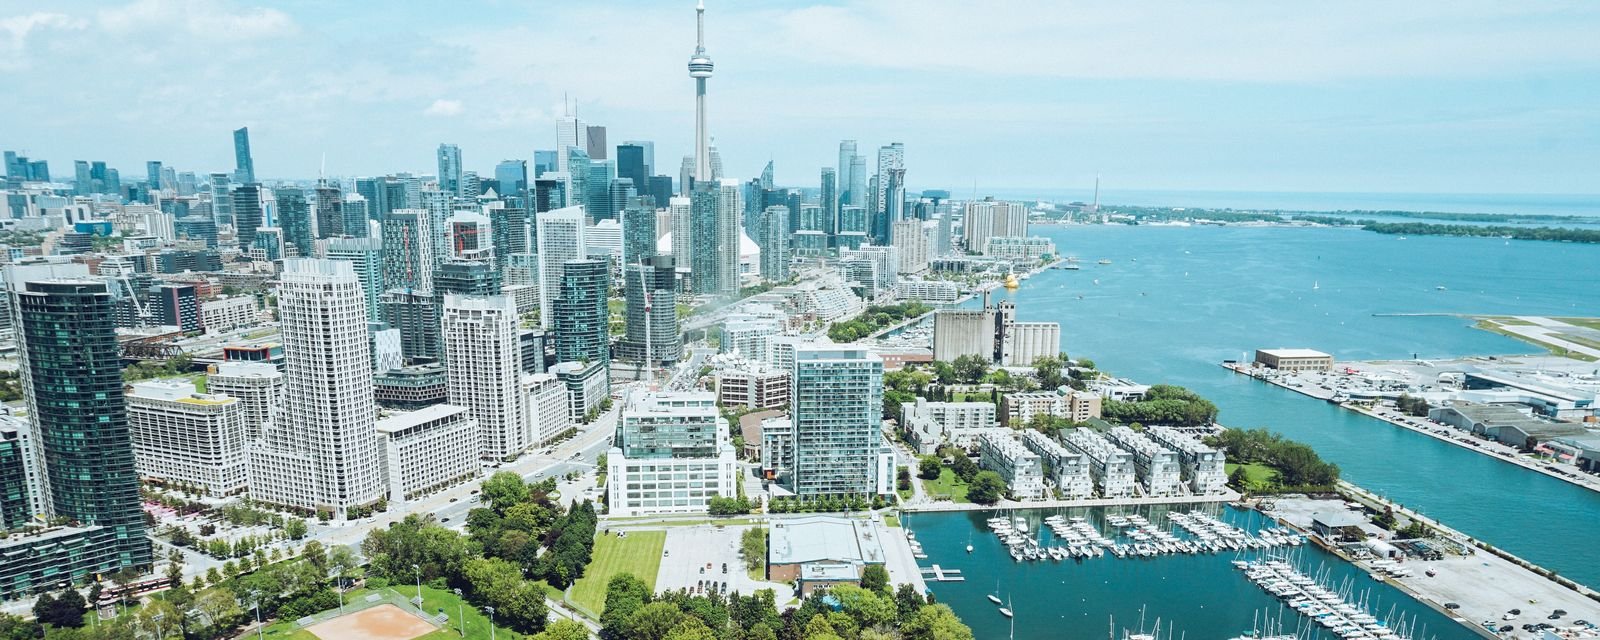 aerial view of toronto city buildings cn tower and lake (1)